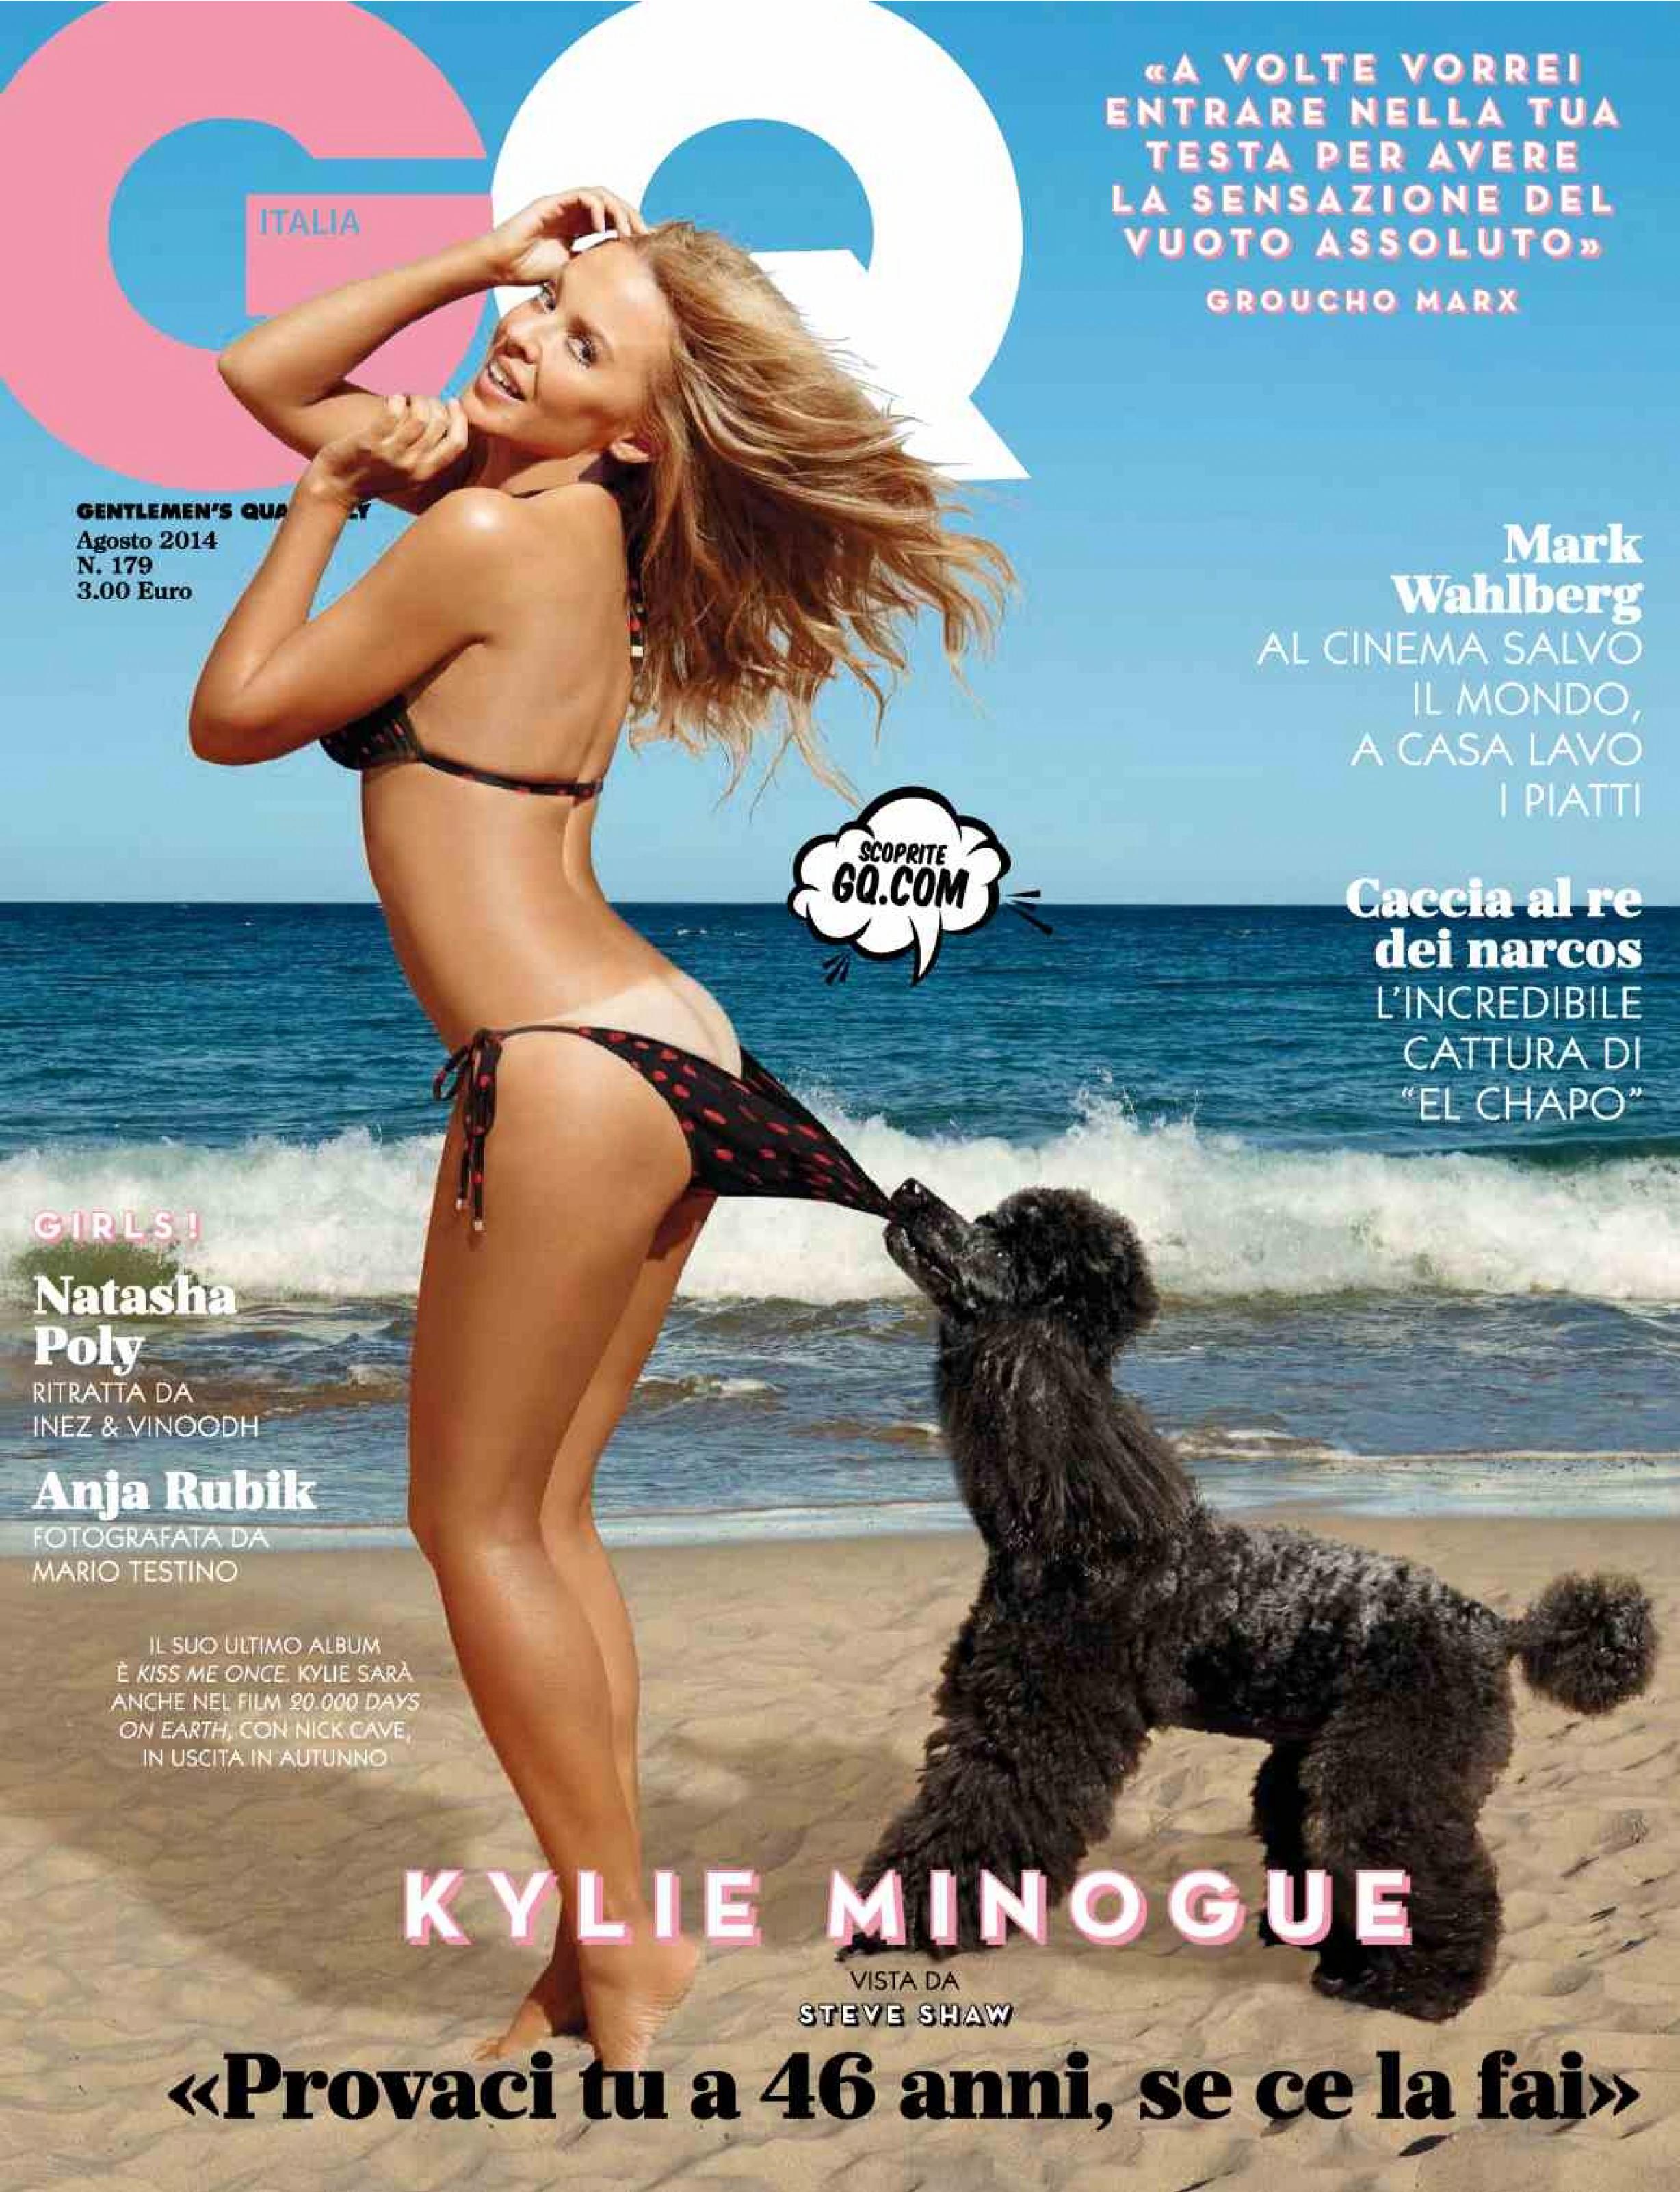 Kylie Minogue for GQ Magazine Italy